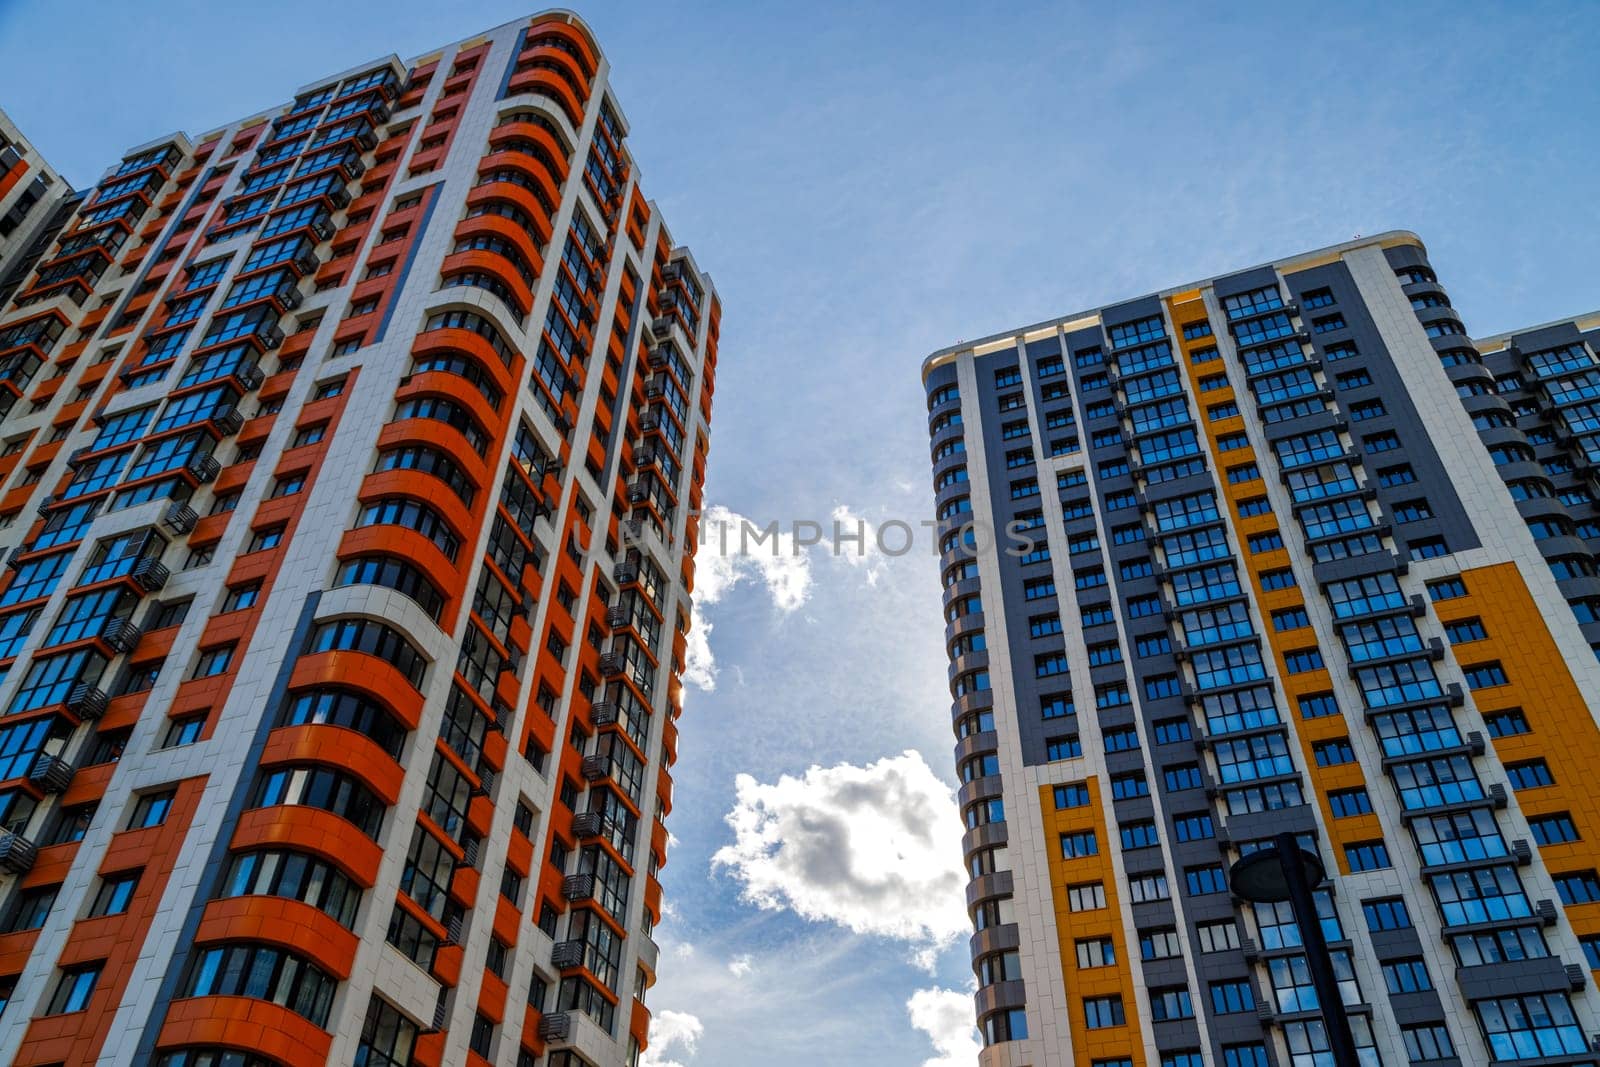 freshly built high rise apartment buildings on blue sky background with white clouds by z1b